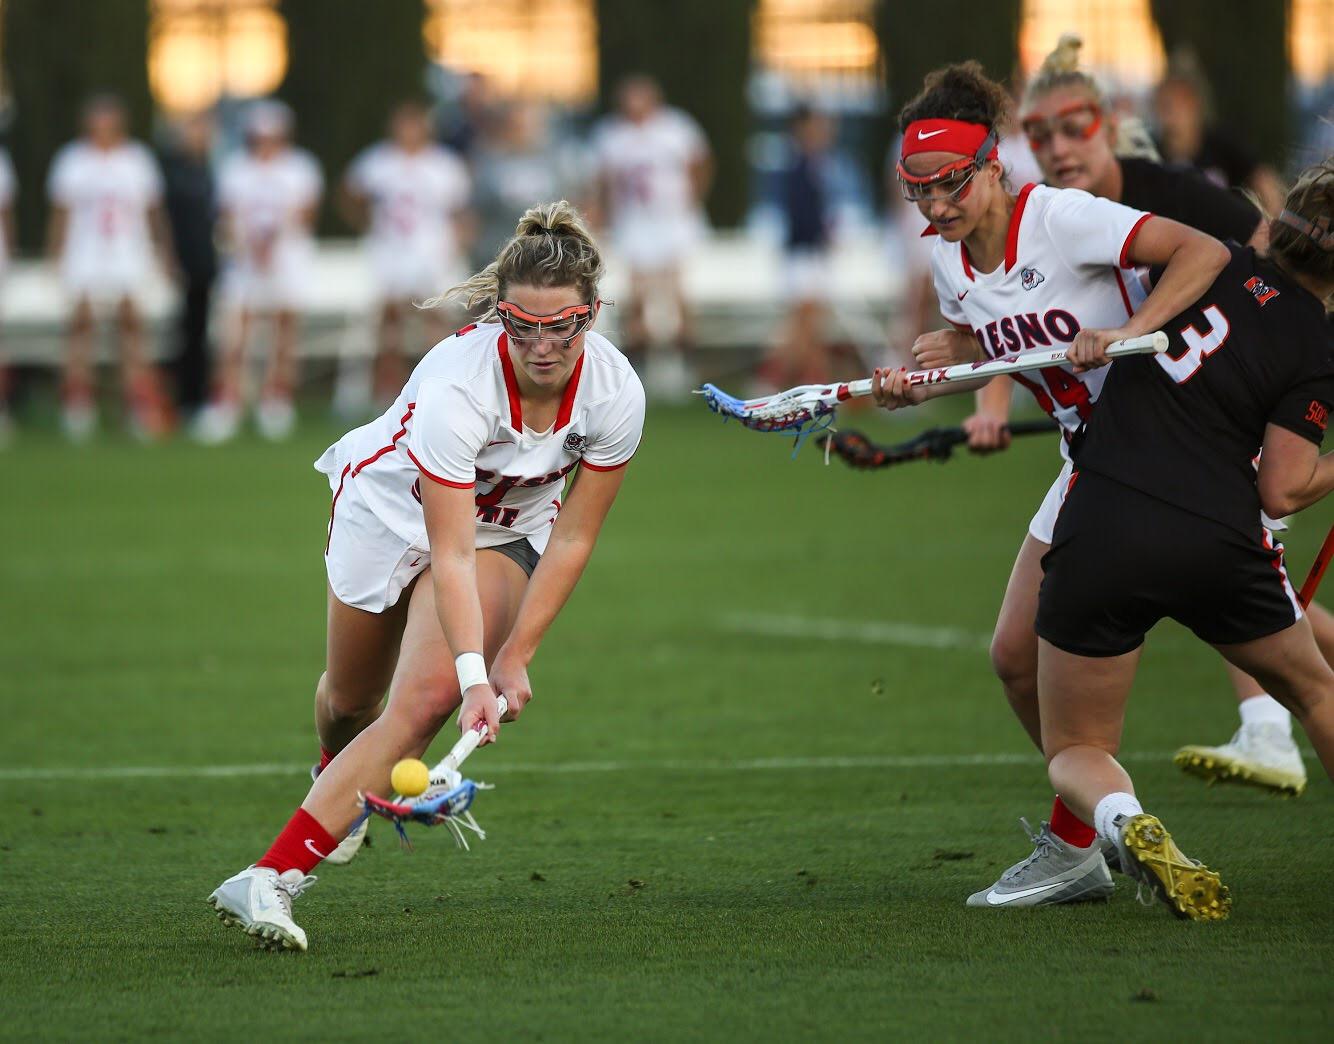 Sophomore+Olivia+Mannon+stretches+for+a+loose+ball+during+Fresno+State%E2%80%99s+lacrosse+game+against+Mercer+University+on+Feb.+16%2C+2018+at+the+Fresno+State+Soccer+and+Lacrosse+Stadium.+%28Alejandro+Soto%2F+The+Collegian%29